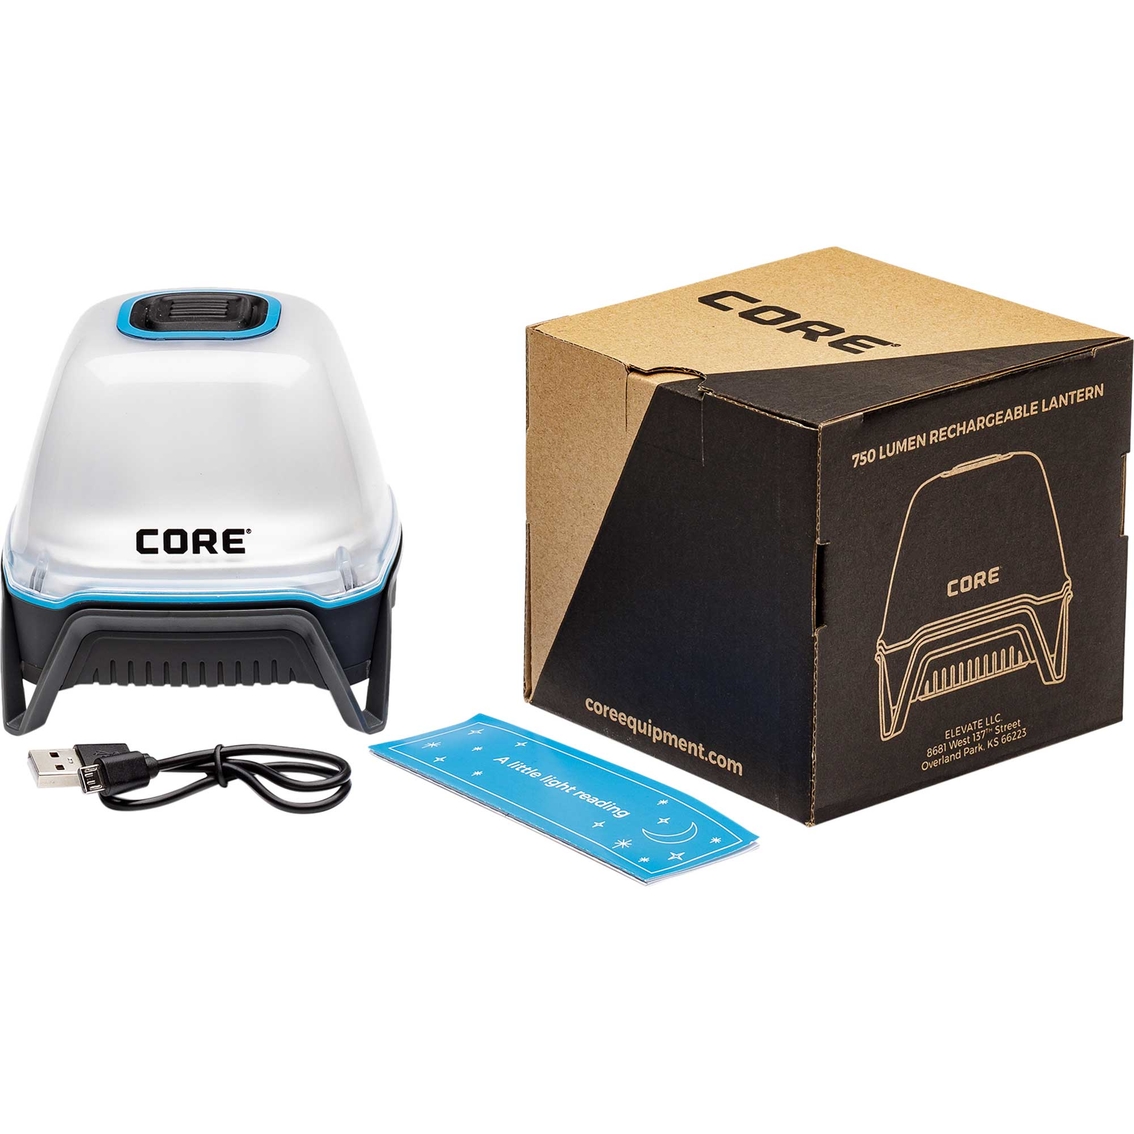 Core Equipment 750L Rechargeable Lantern with USB Output - Image 9 of 10